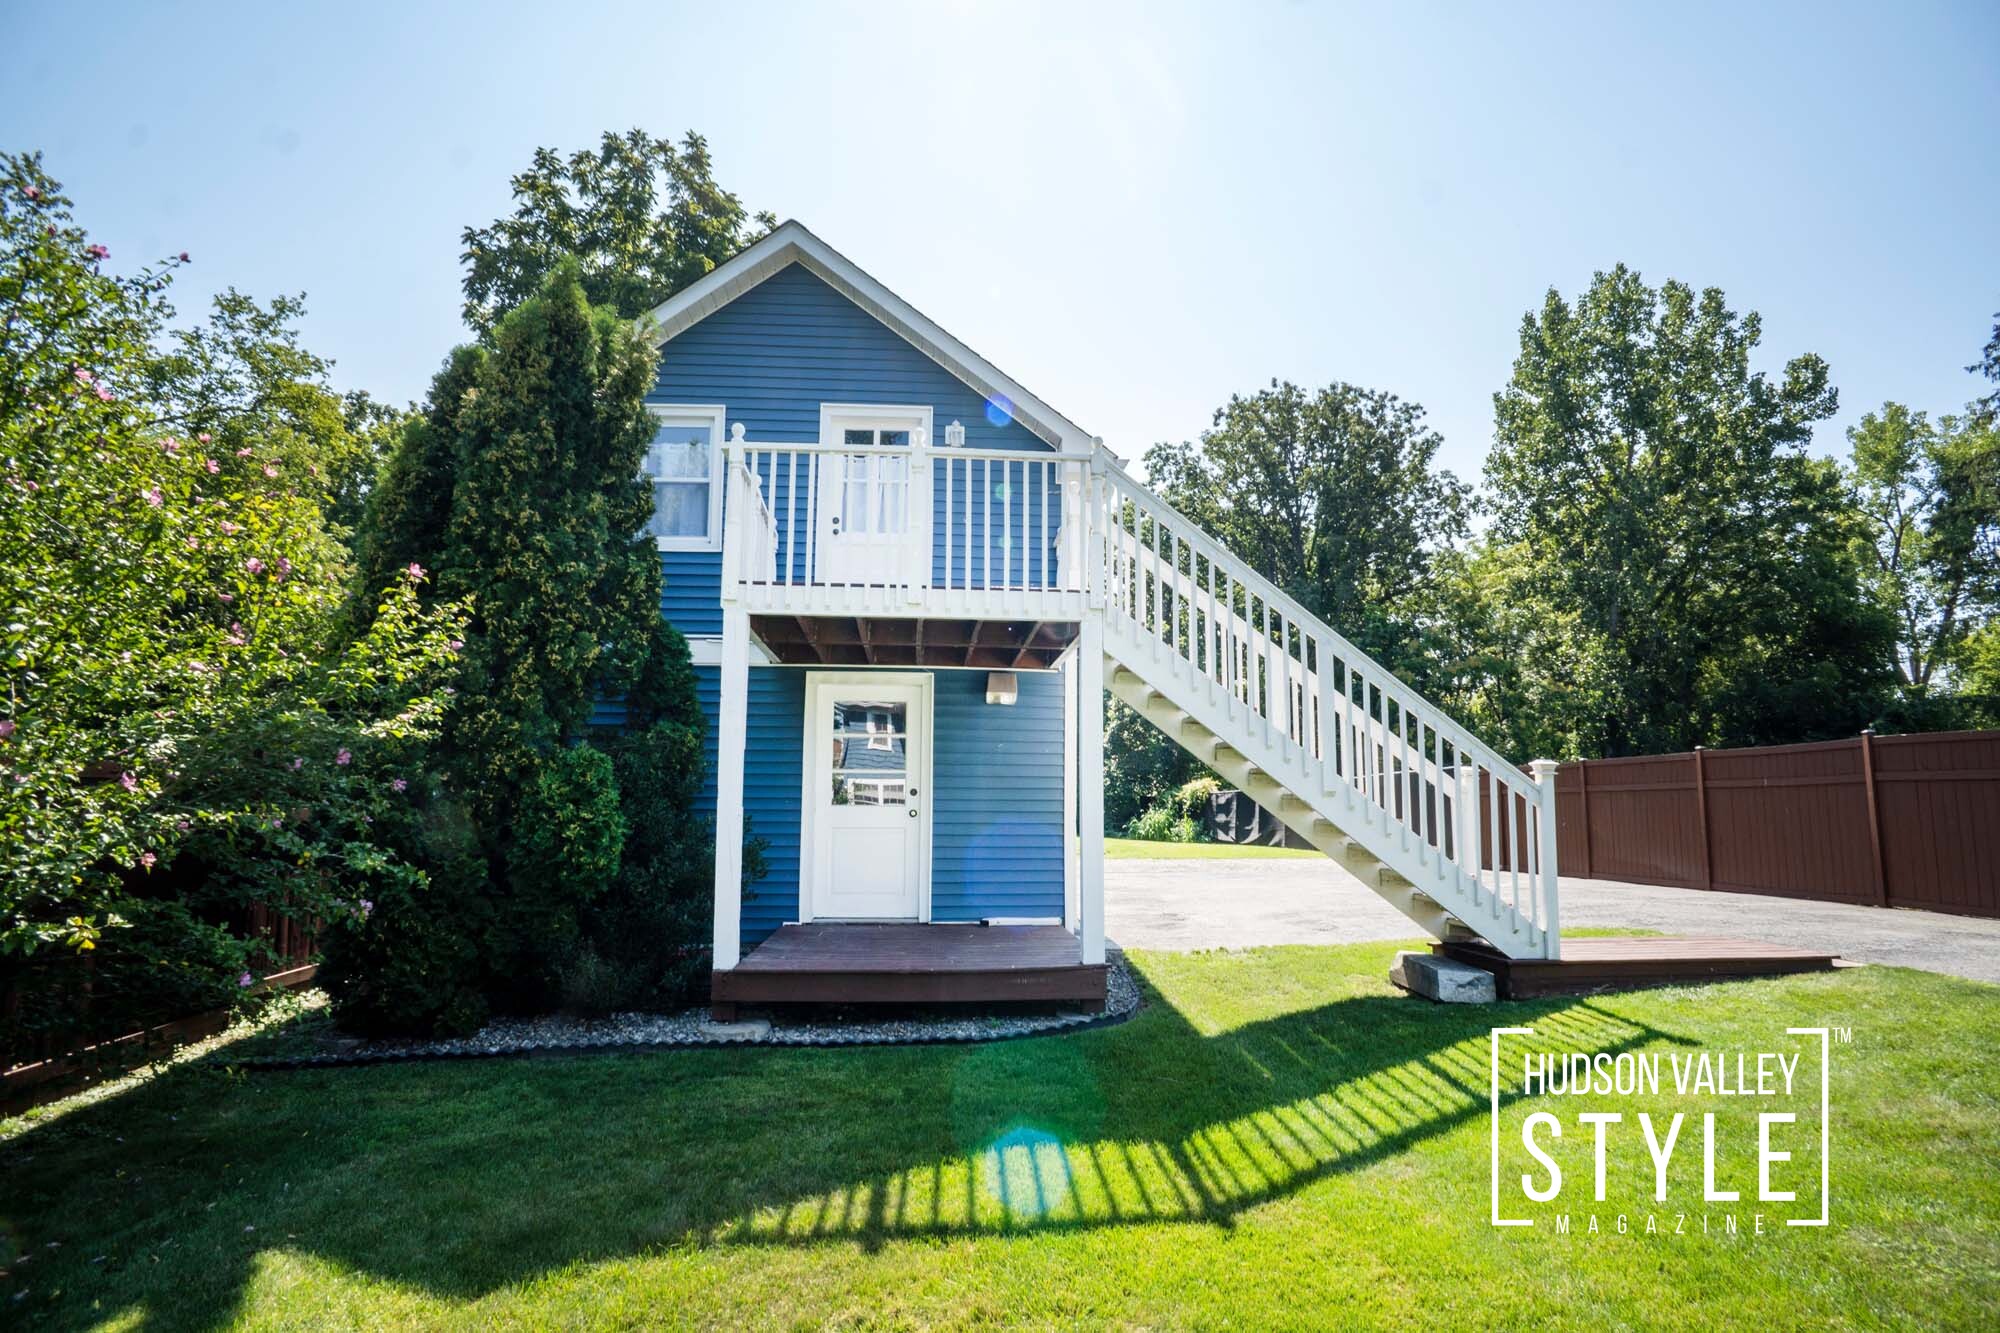 Beautiful and Cozy Hudson Valley Home for Sale by Owner just a Block away from the Hudson River and Chelsea, NY Yacht Club – Real Estate Photography by Duncan Avenue